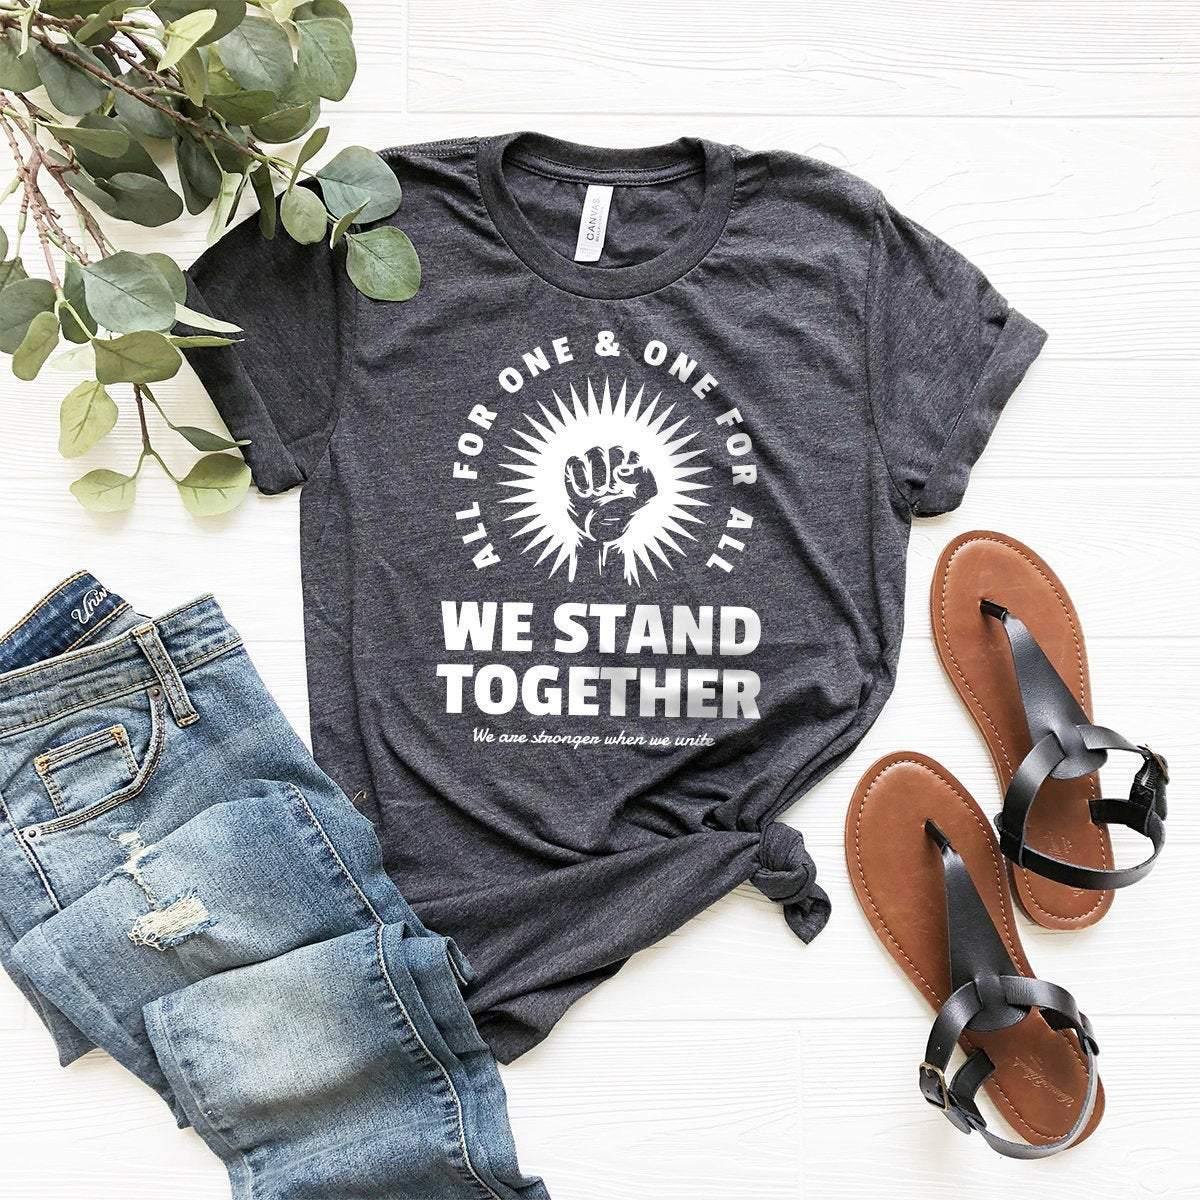 We Stand Together Shirt, Equality Shirt, Stop Racism Shirt,Unity In Diversity,All Lives Matter Shirt,All For One One For All Shirt - Fastdeliverytees.com